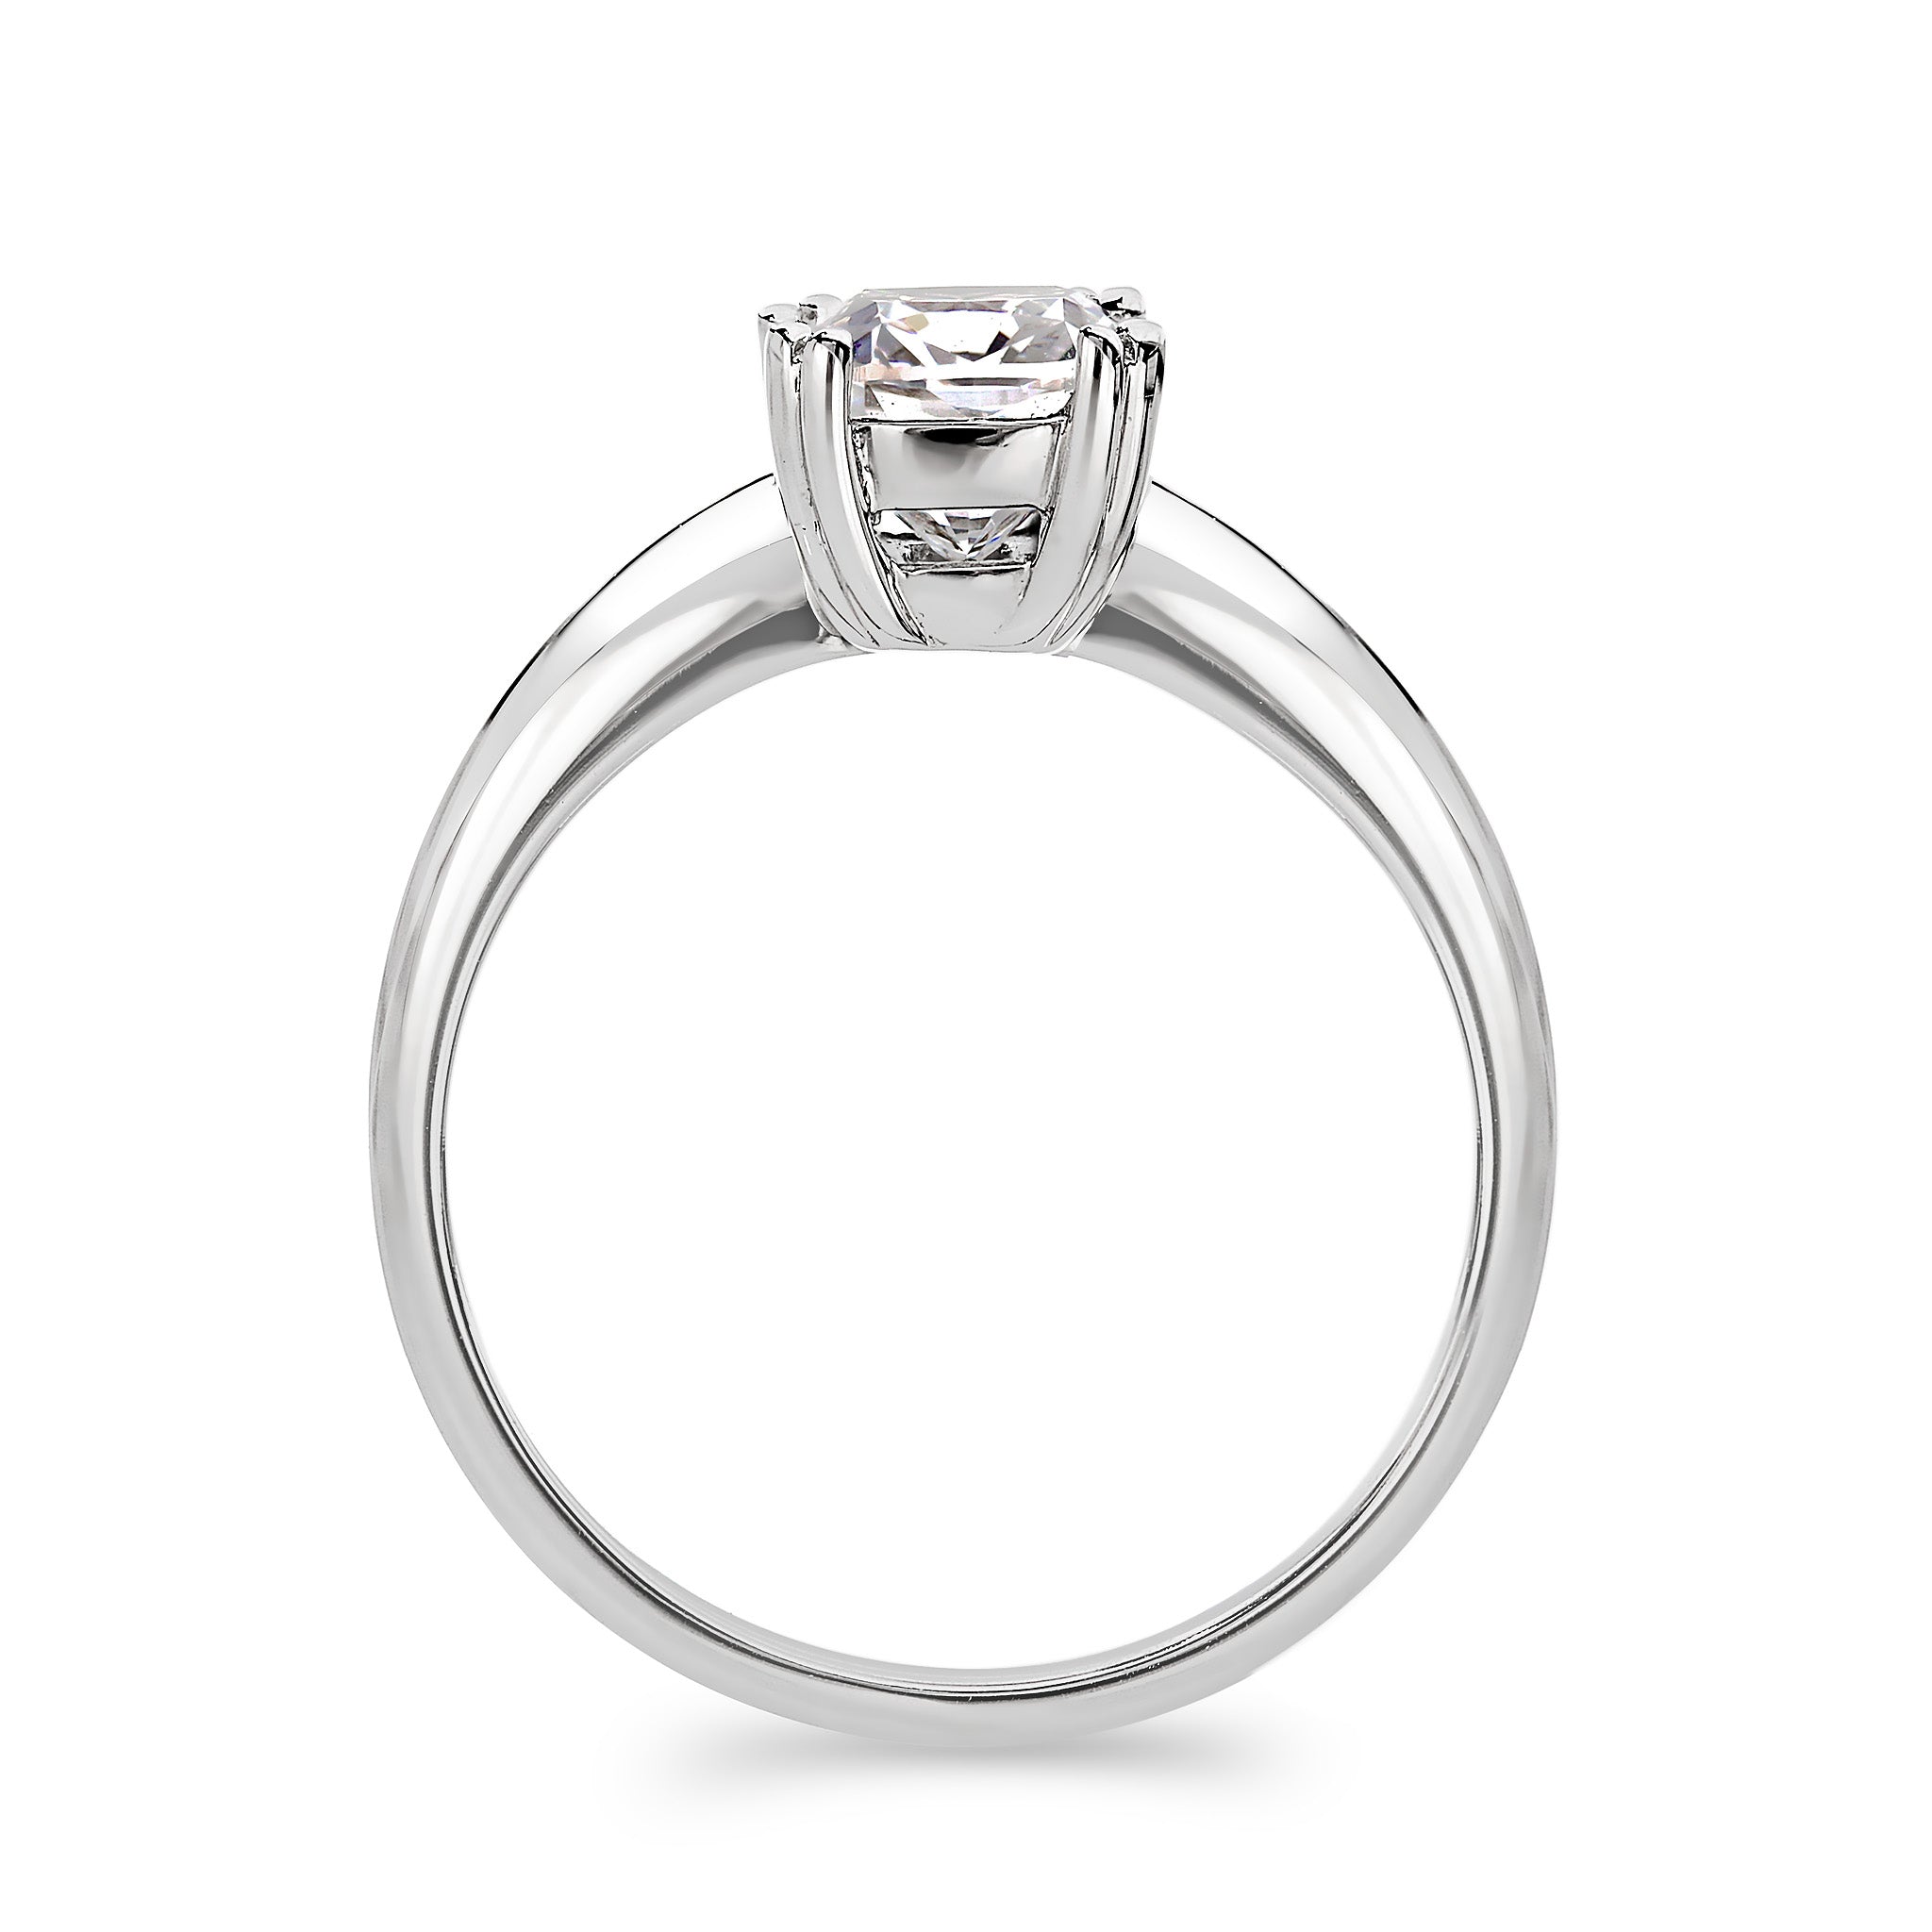 Solitaire Diamond Engagement Ring - Side View - SHIMANSKY.CO.ZA